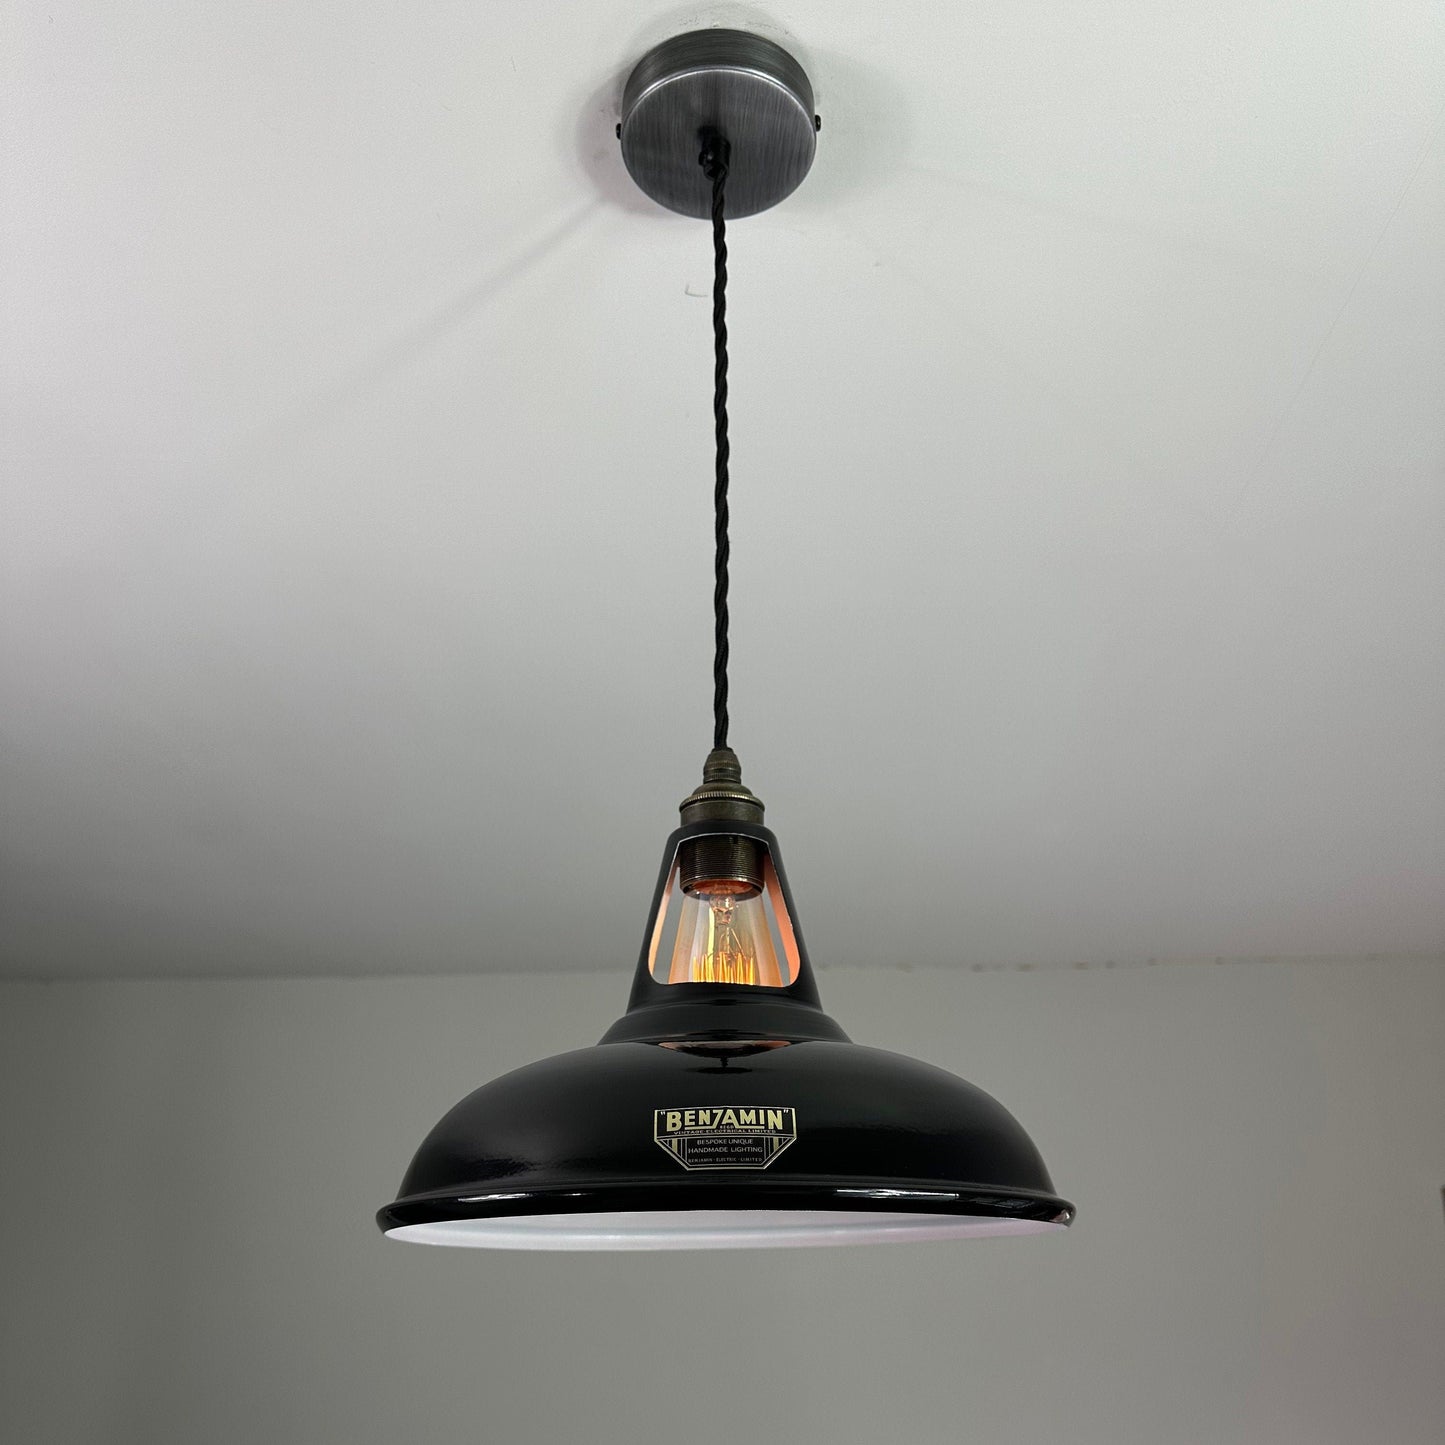 Cawston ~ Midnight Black Solid Shade Slotted Design Pendant Set Light | Ceiling Dining Room | Kitchen Table | Vintage Filament Bulb 11 Inch